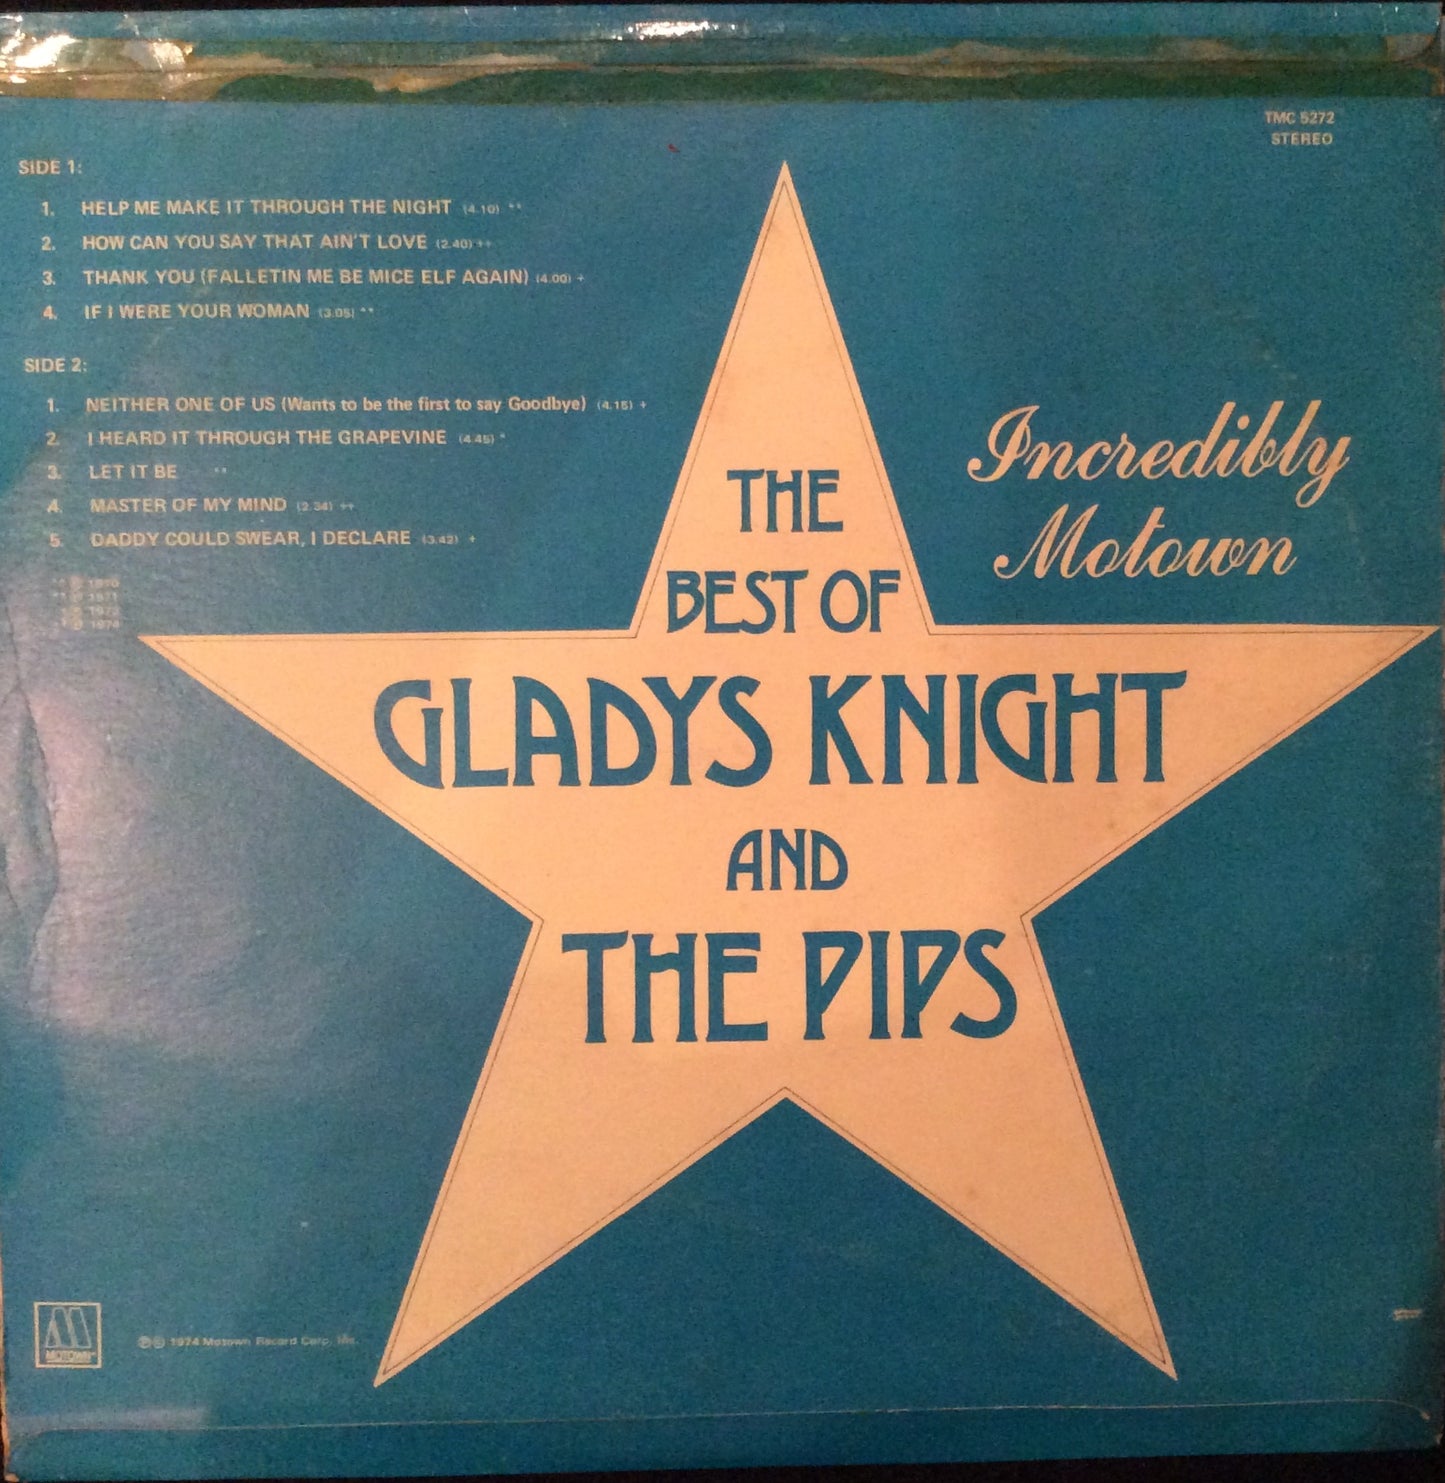 Gladys Knight And The Pips - The Best Of Gladys Knight And The Pips